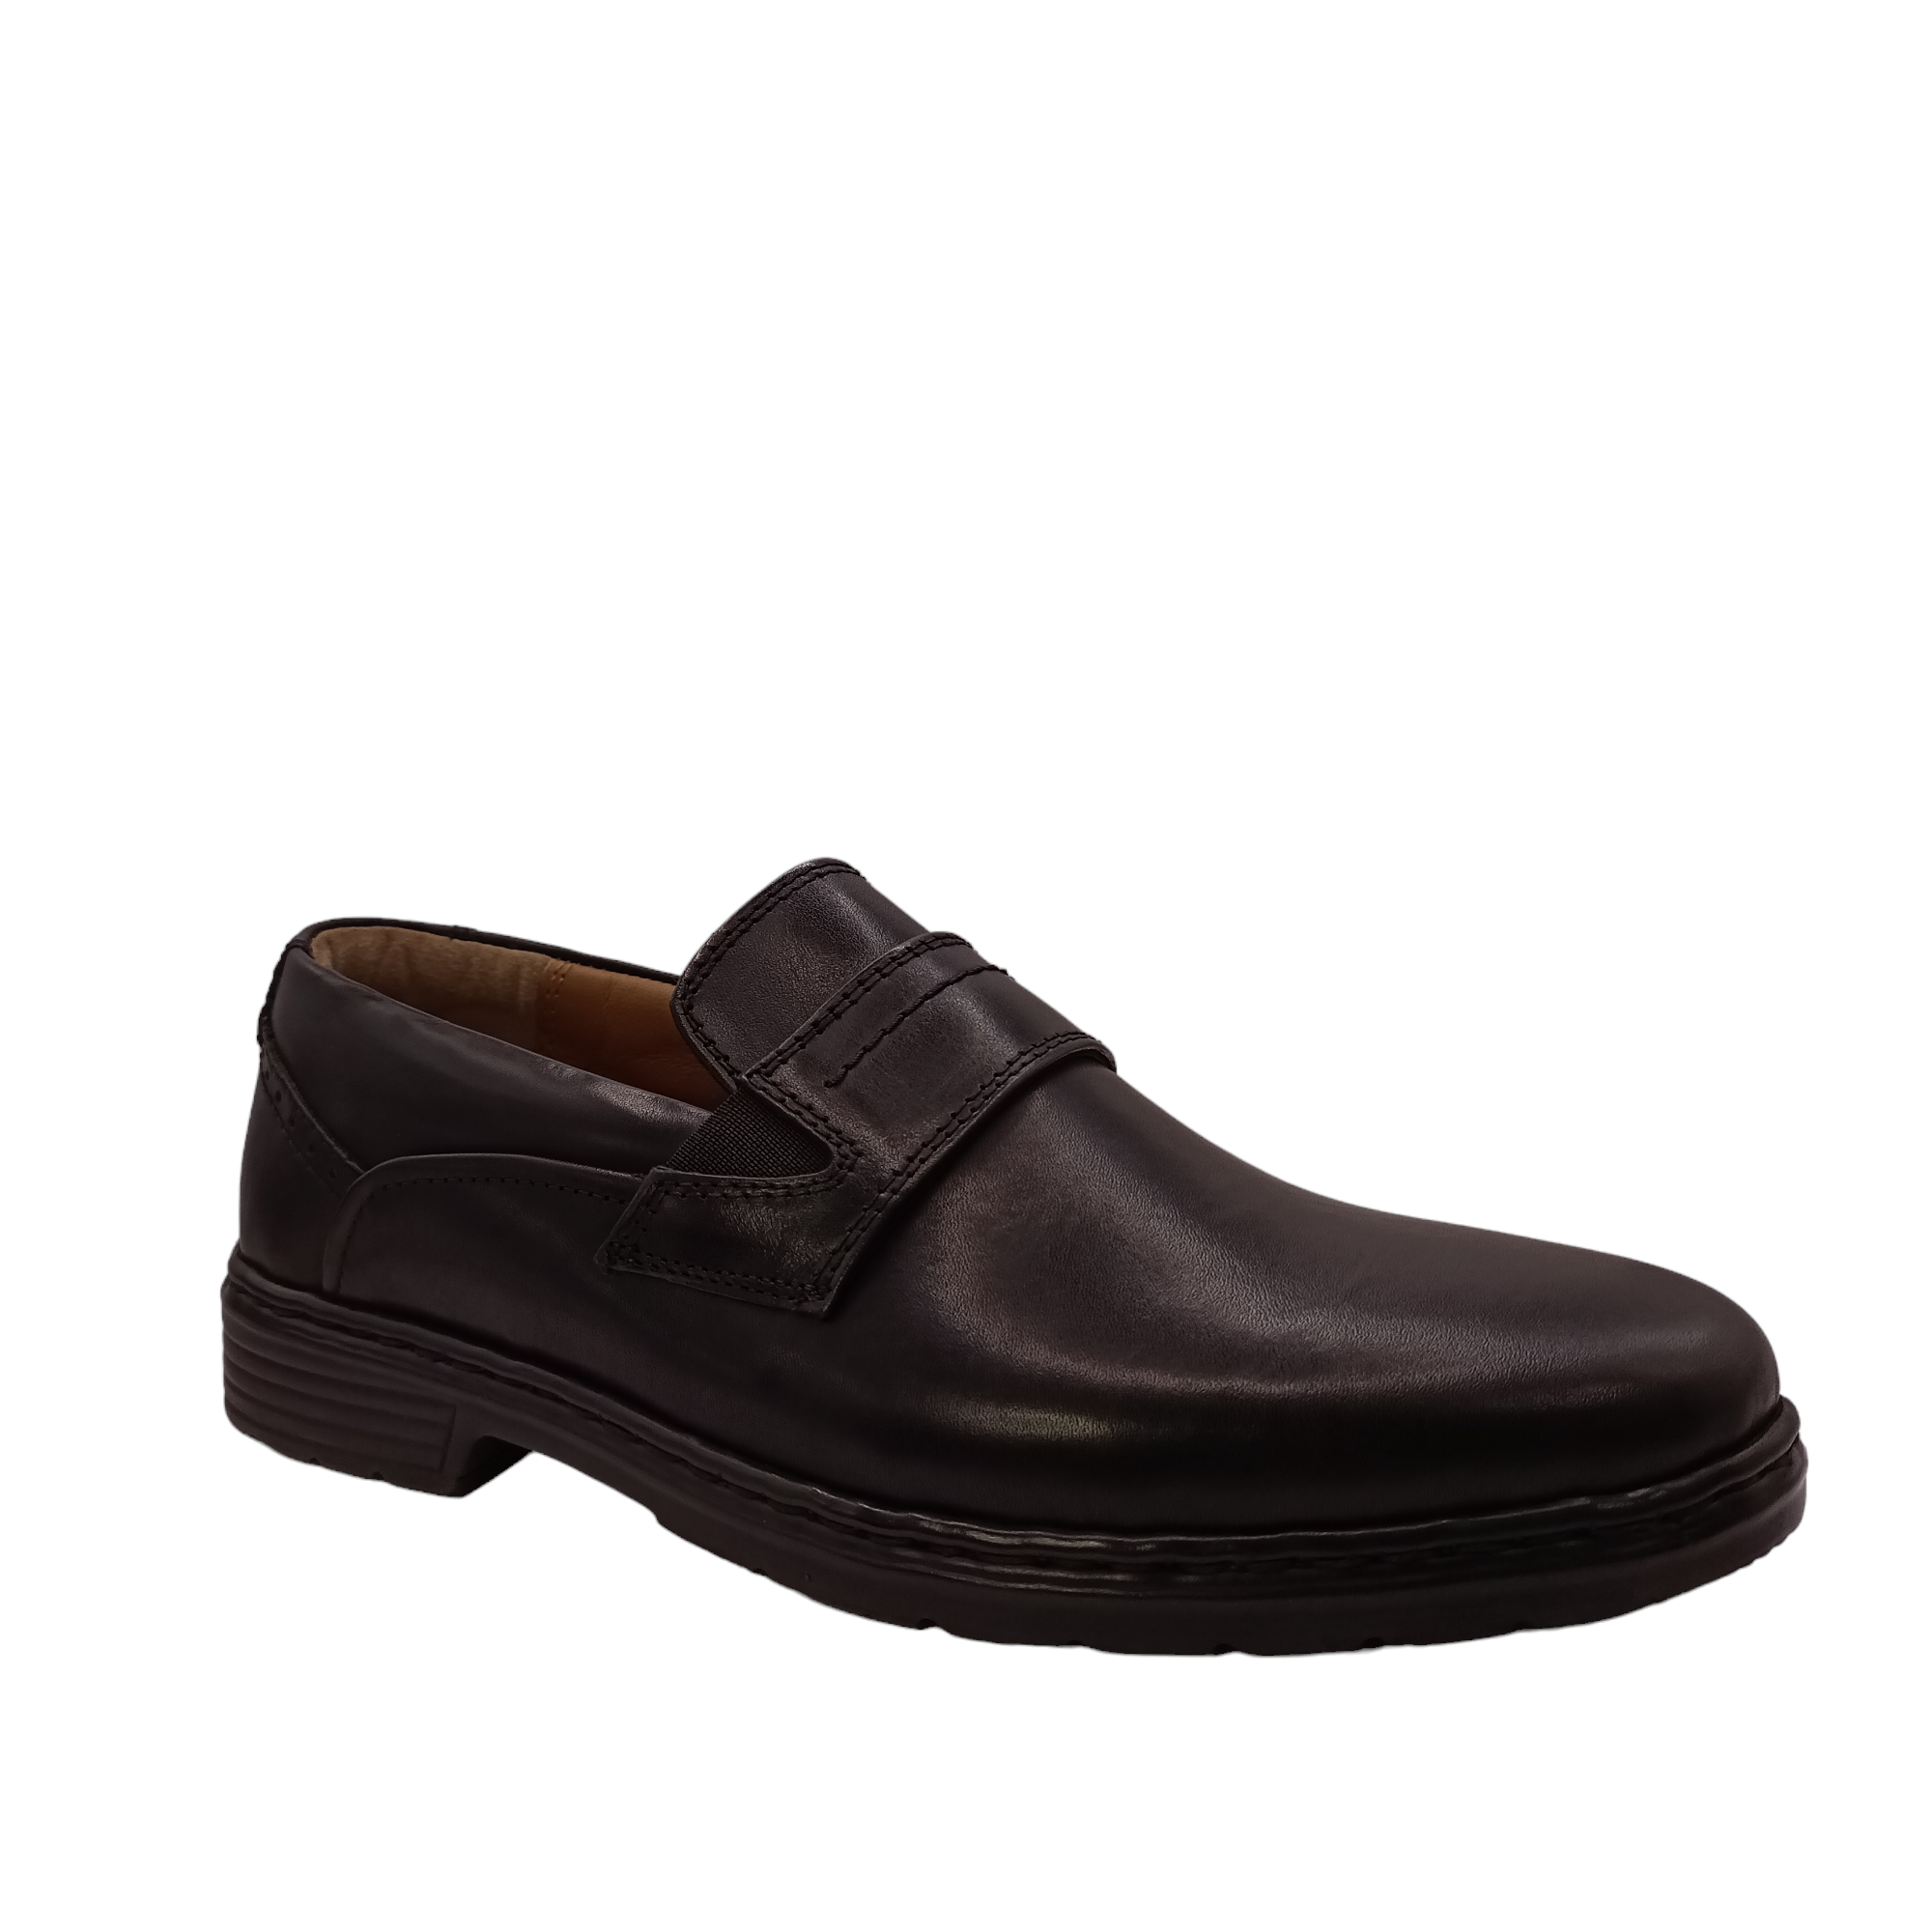 Shop Alastair 15 Josef Seibel - with shoe&me - from Josef Seibel - Shoes - Mens, Shoe, Winter - [collection]